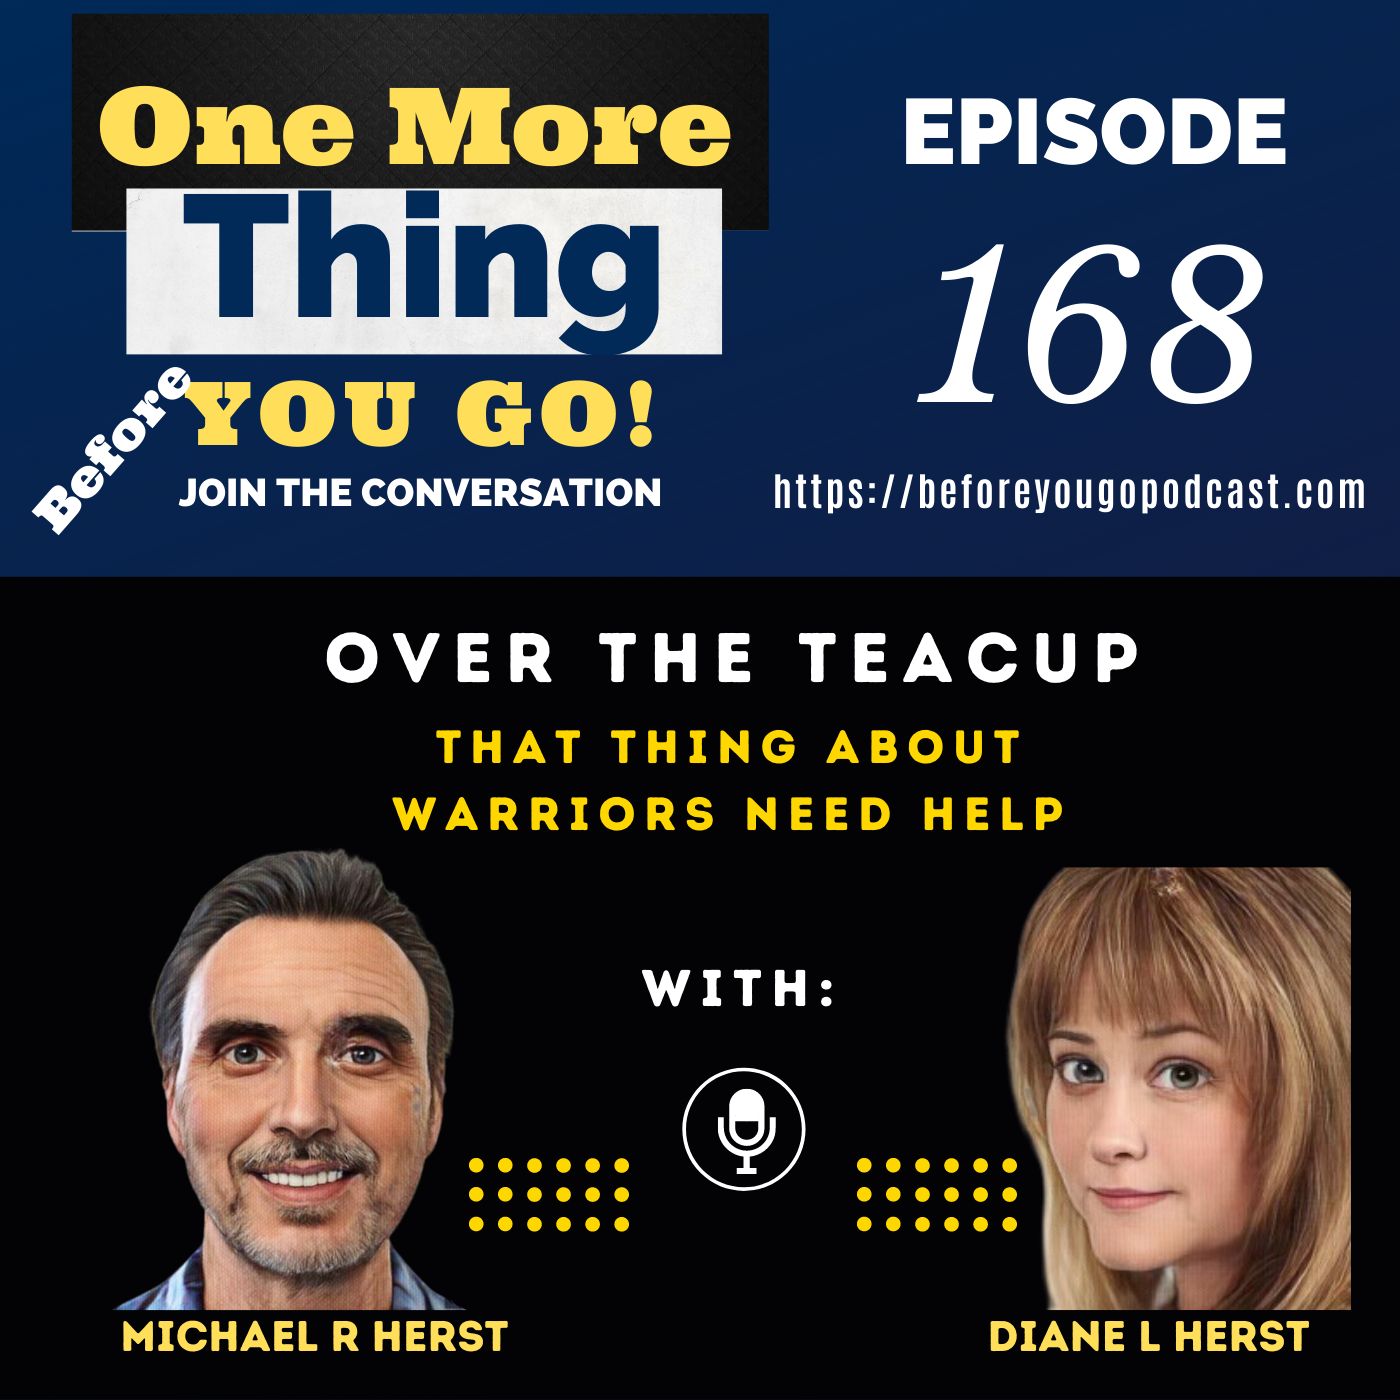 That Thing About -Over the Teacup - "When Warriors Need Help" Image